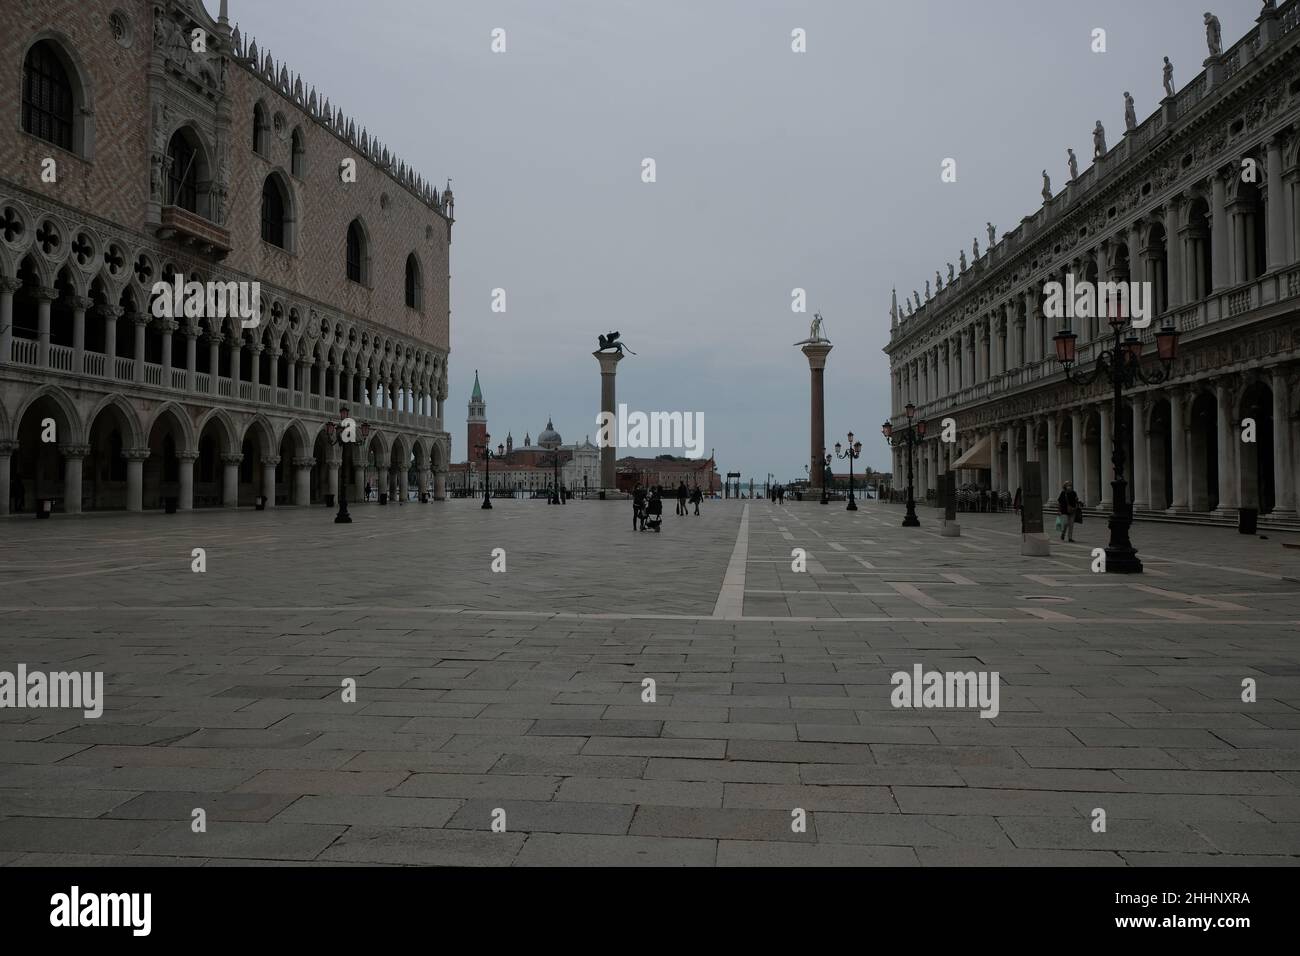 Views of Venice during the lockdown caused by coronavirus disease. Venice, Italy, May 17, 2020. Stock Photo